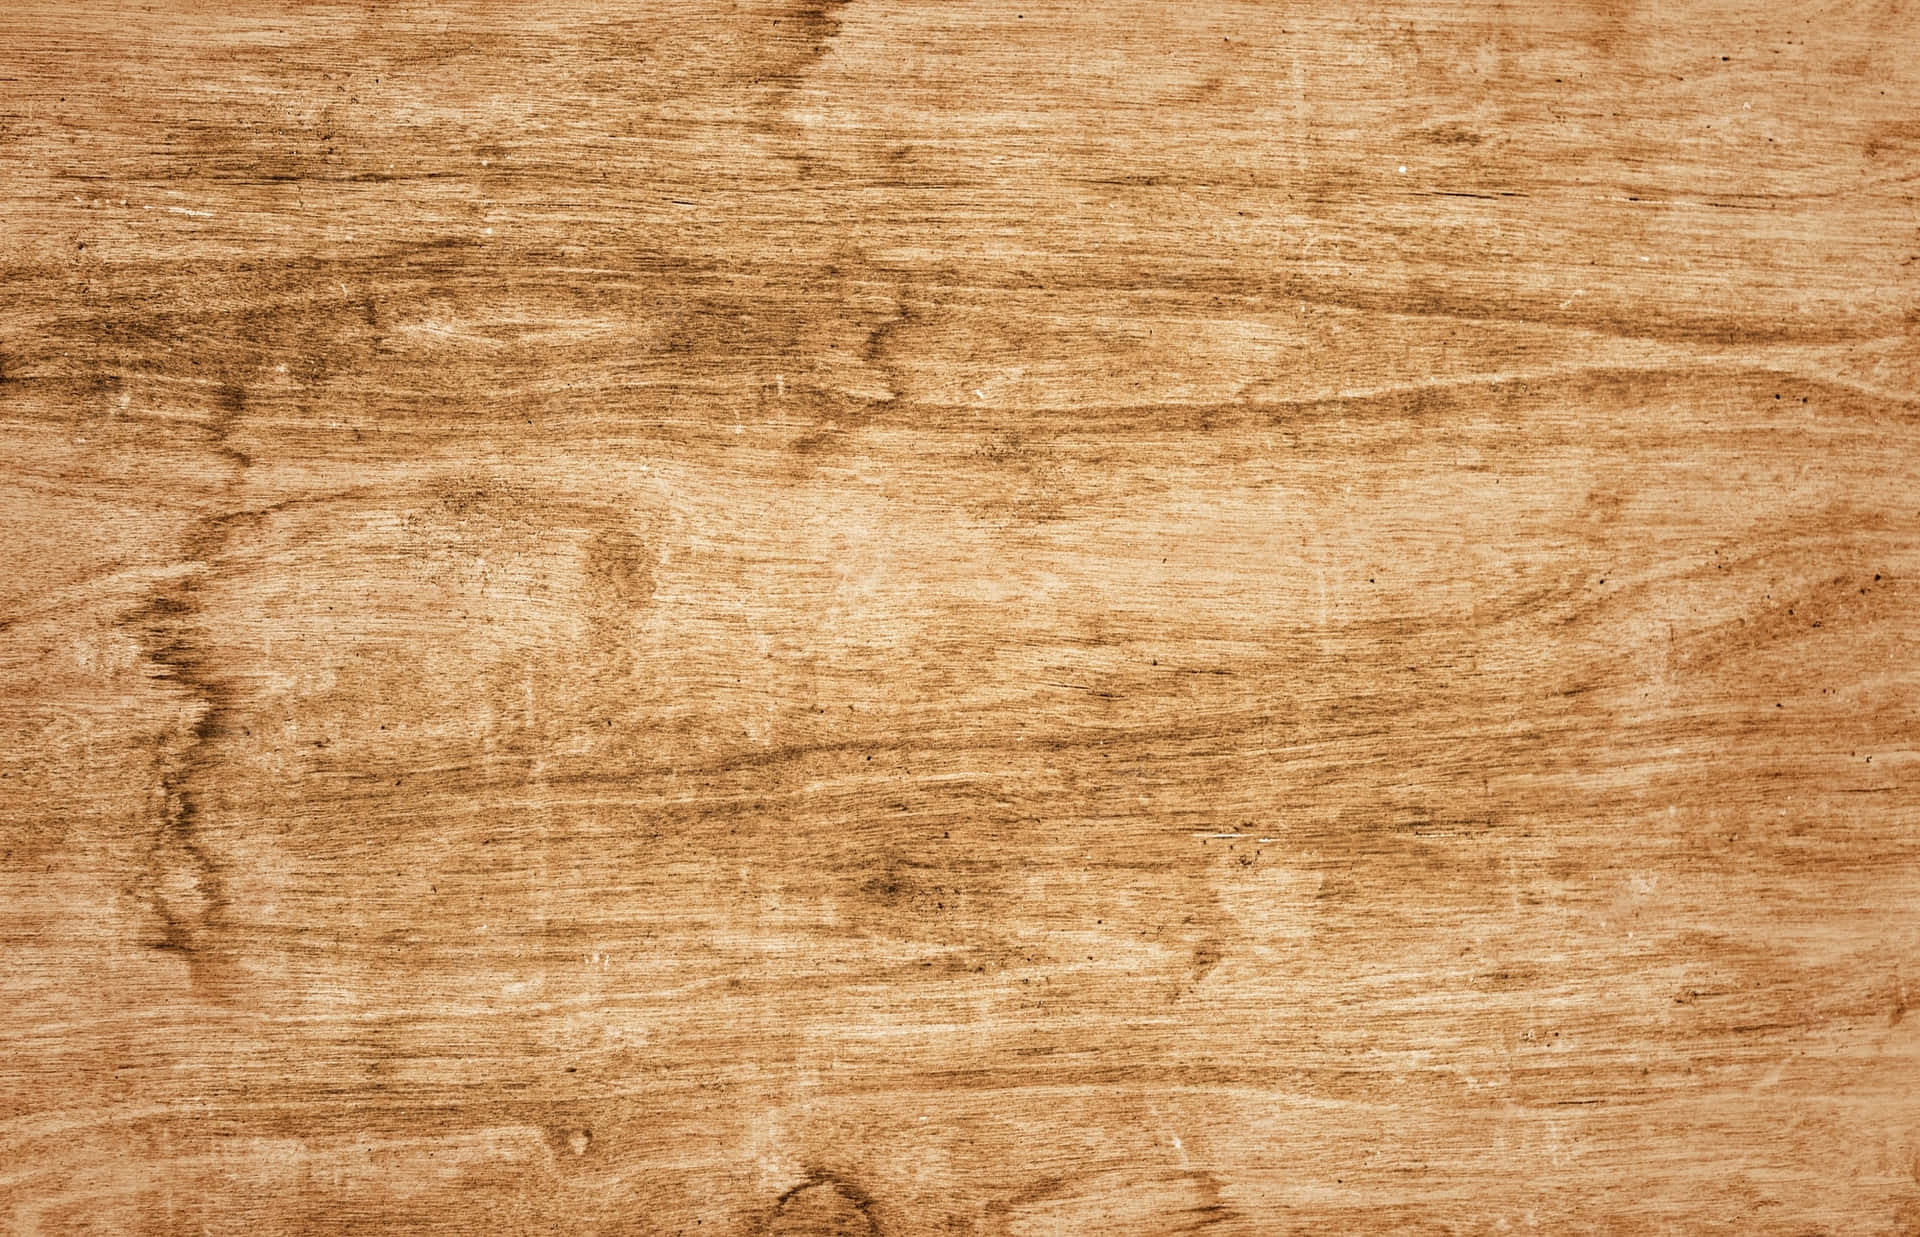 Stained Maple Plywood Wooden Background Wallpaper